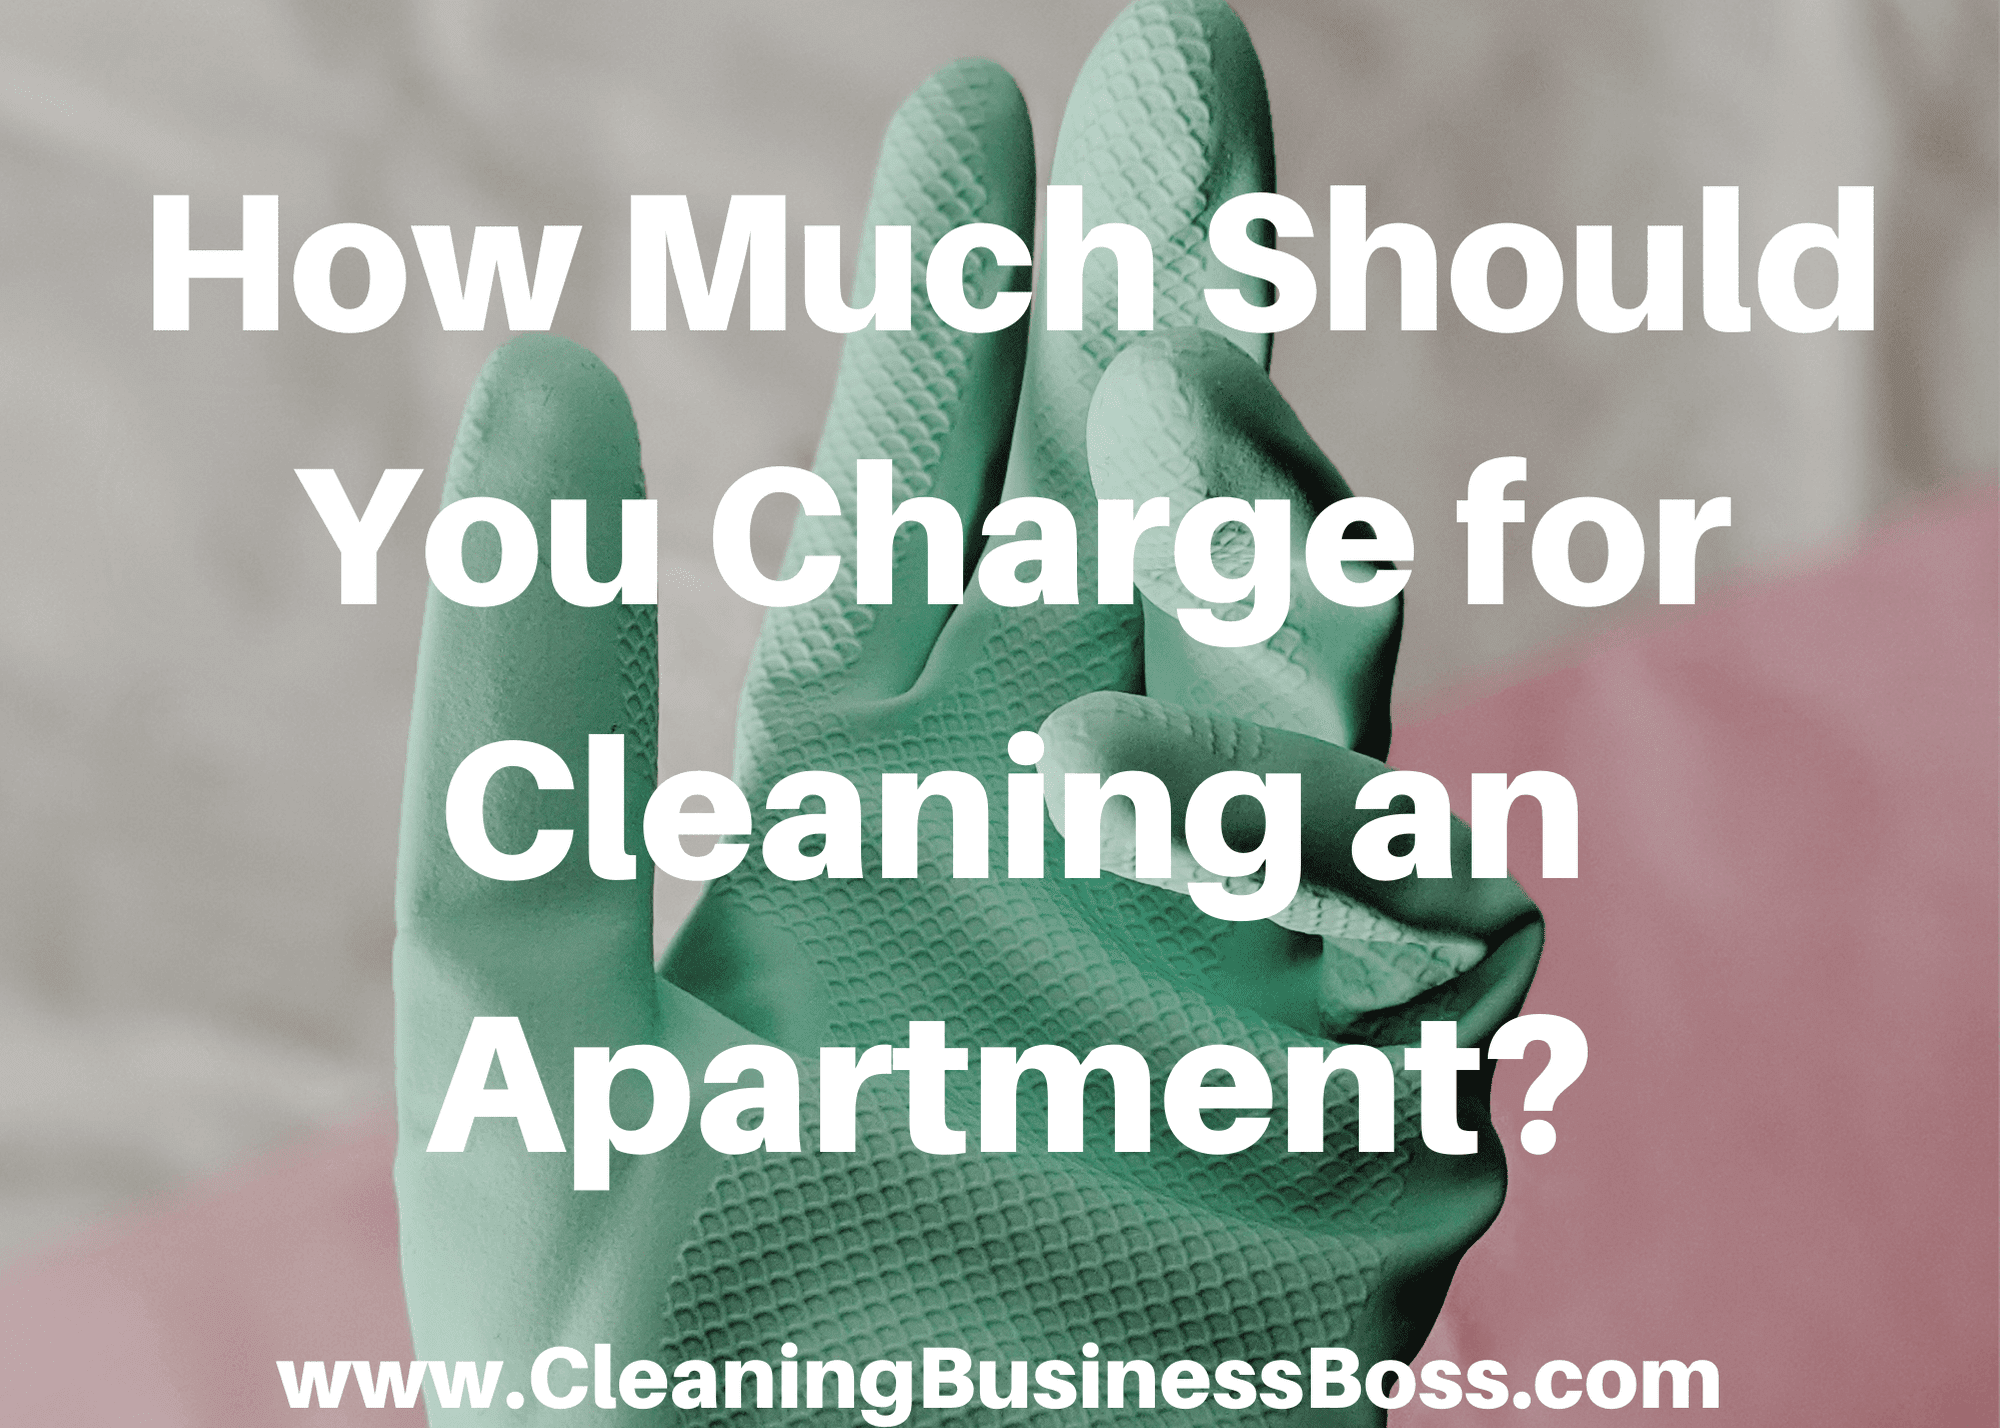 How much should you charge for cleaning and apartment?